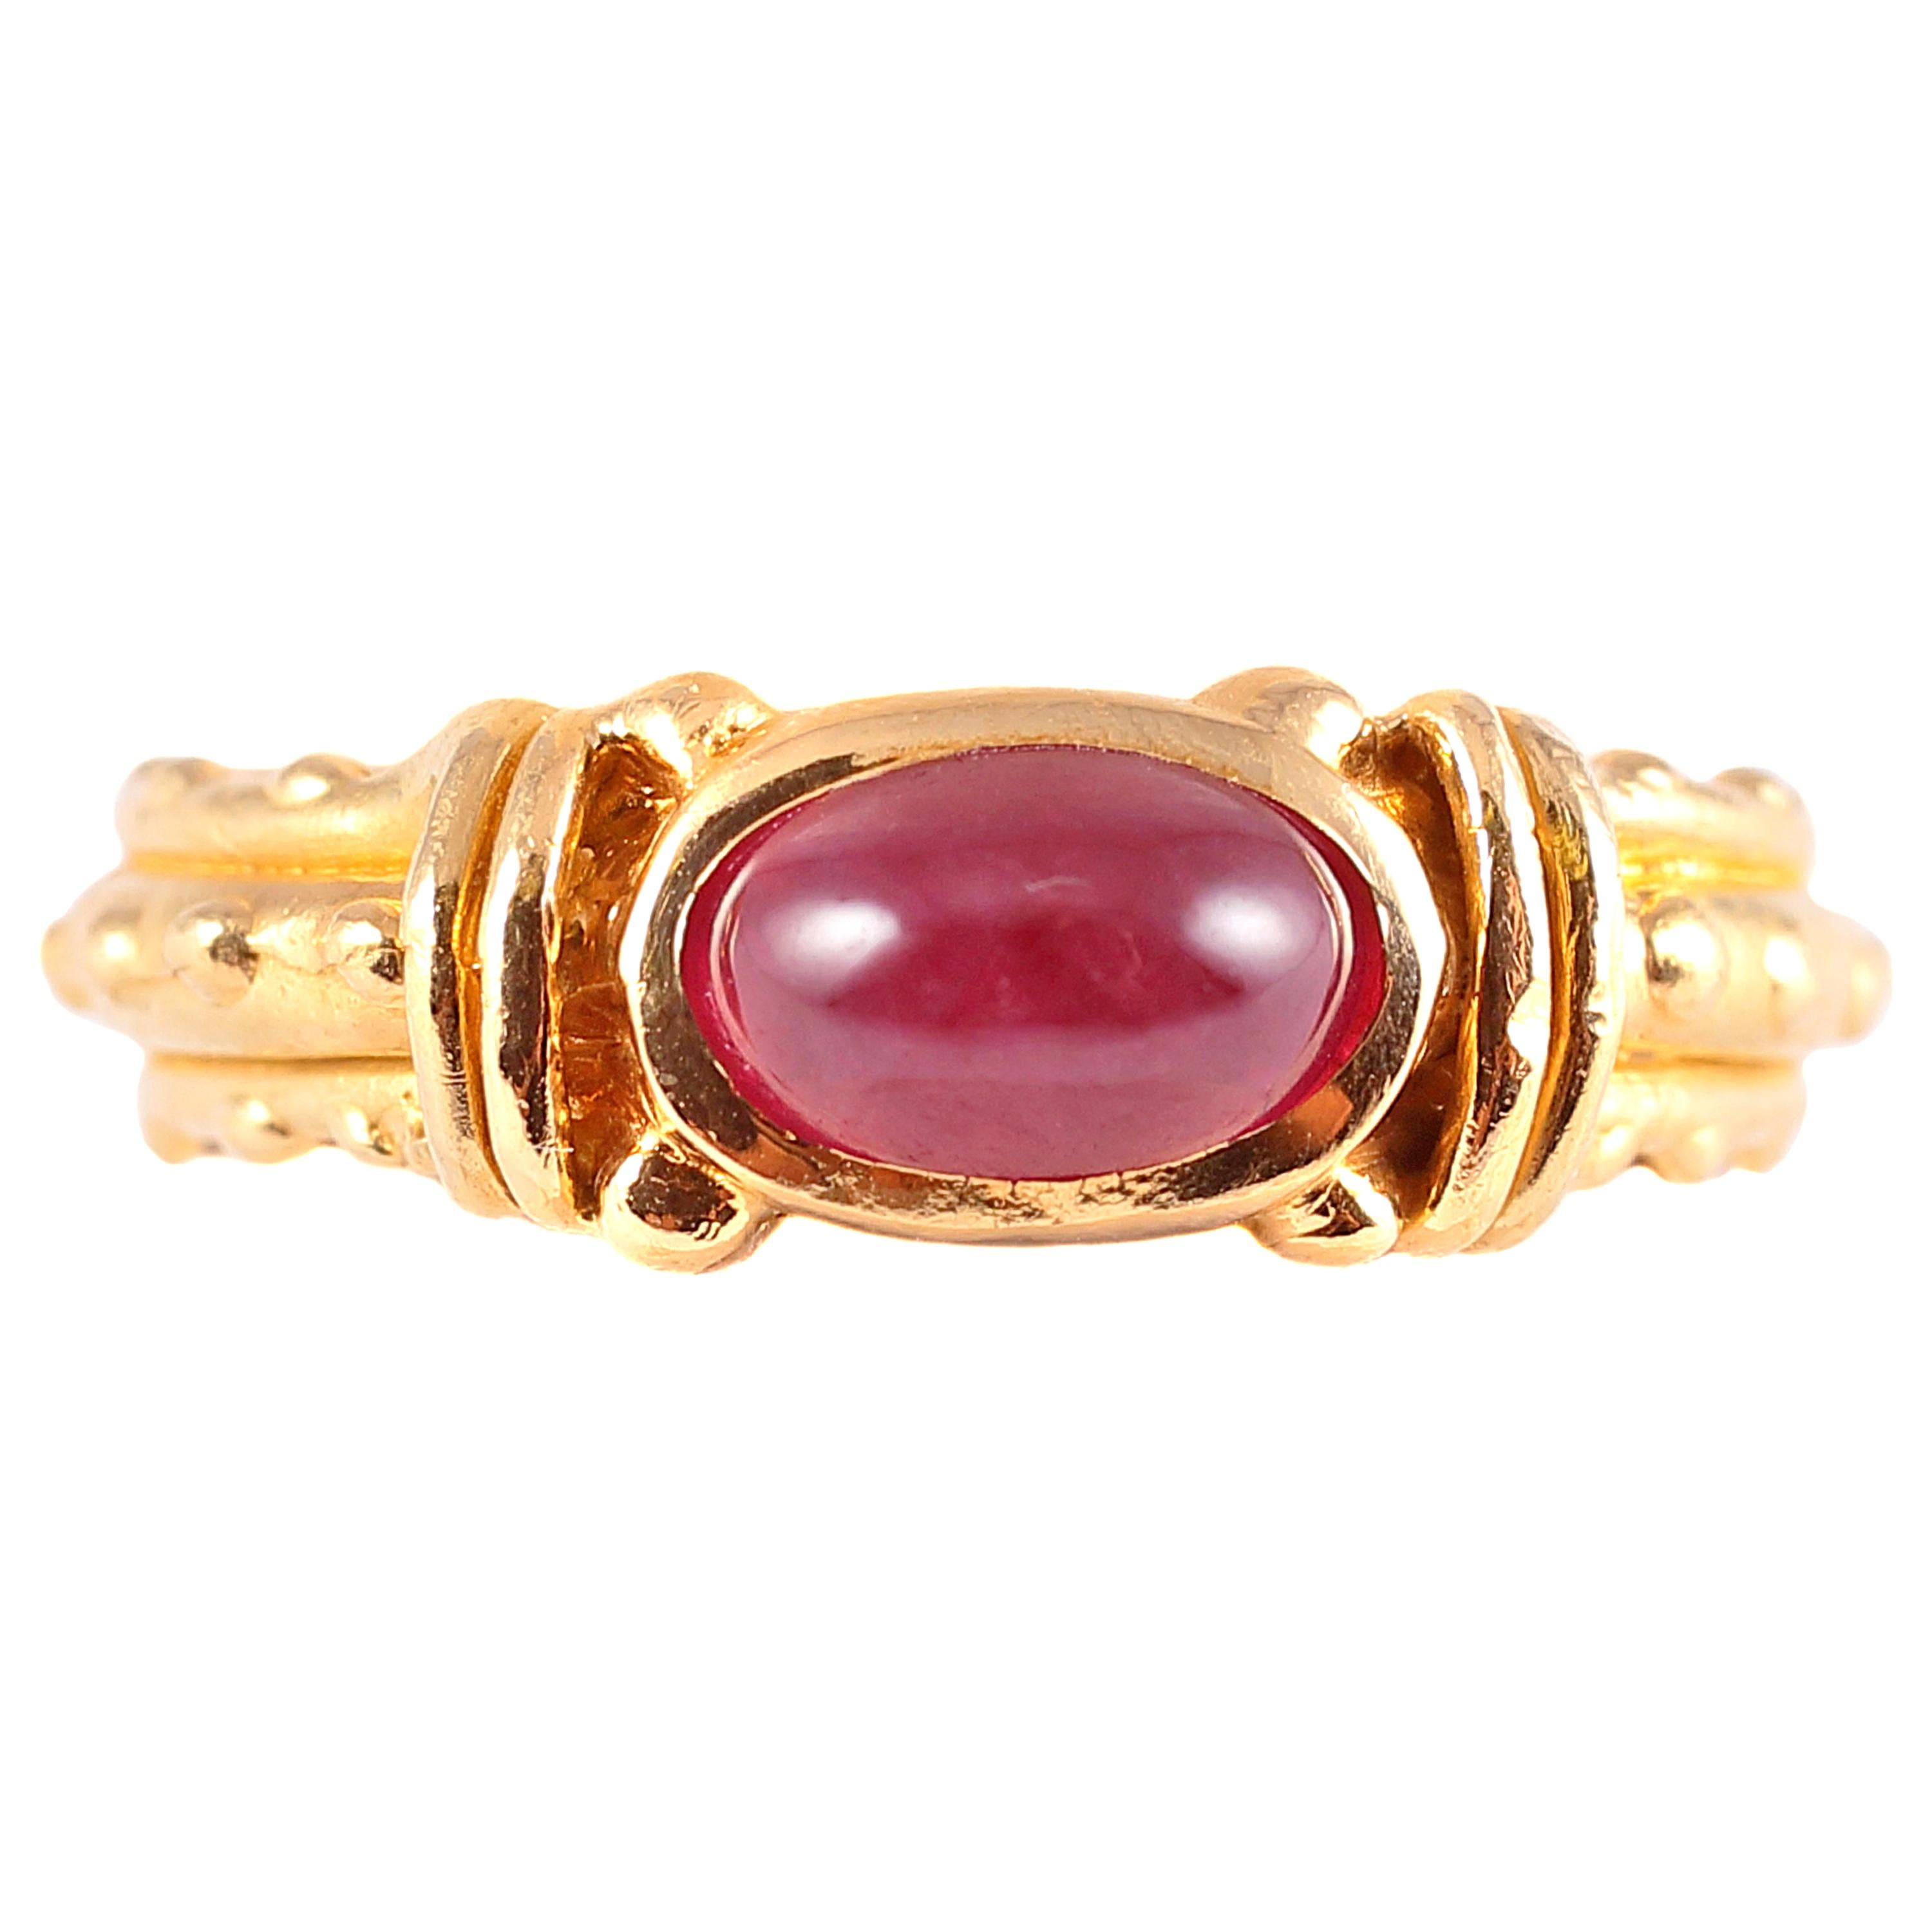 20 Karat Yellow Gold Ruby Ring by Tiana Wages